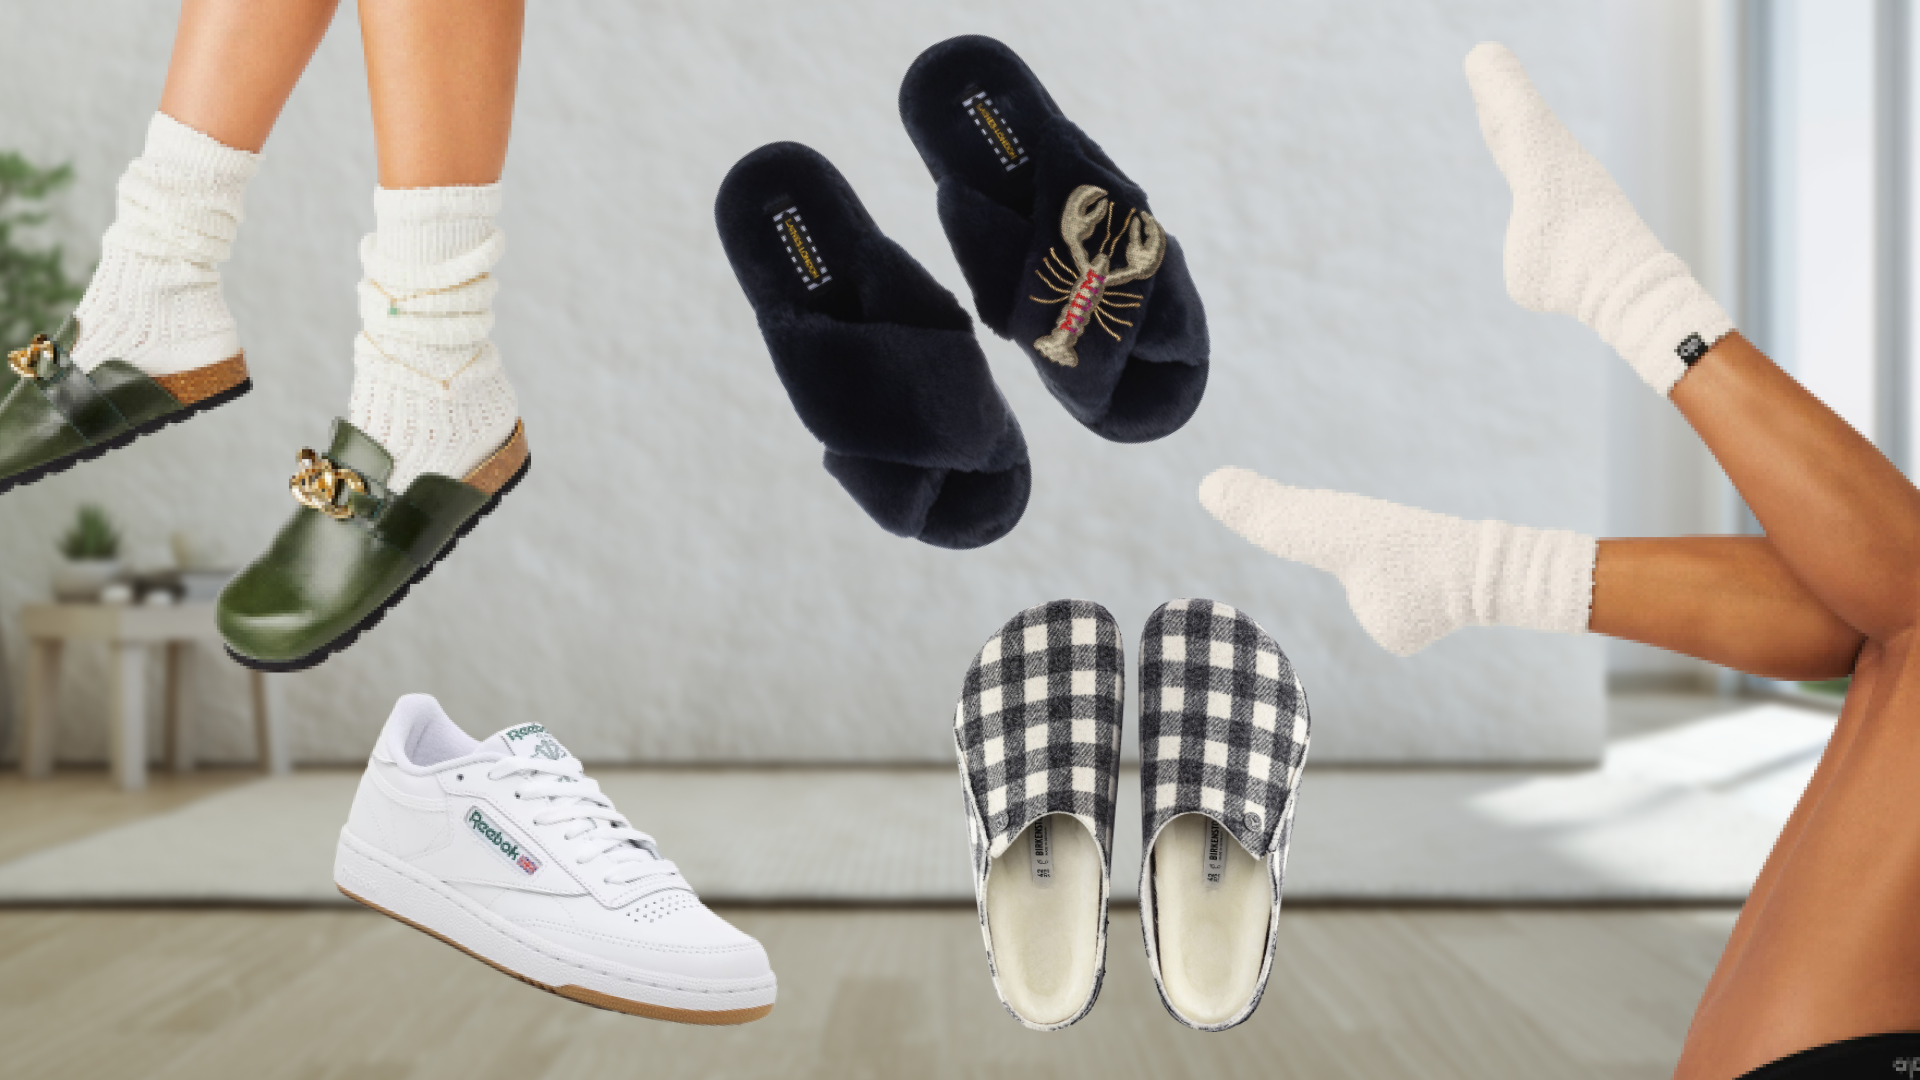 Our Favorite Comfy Socks, Slippers, and Everyday Sneakers